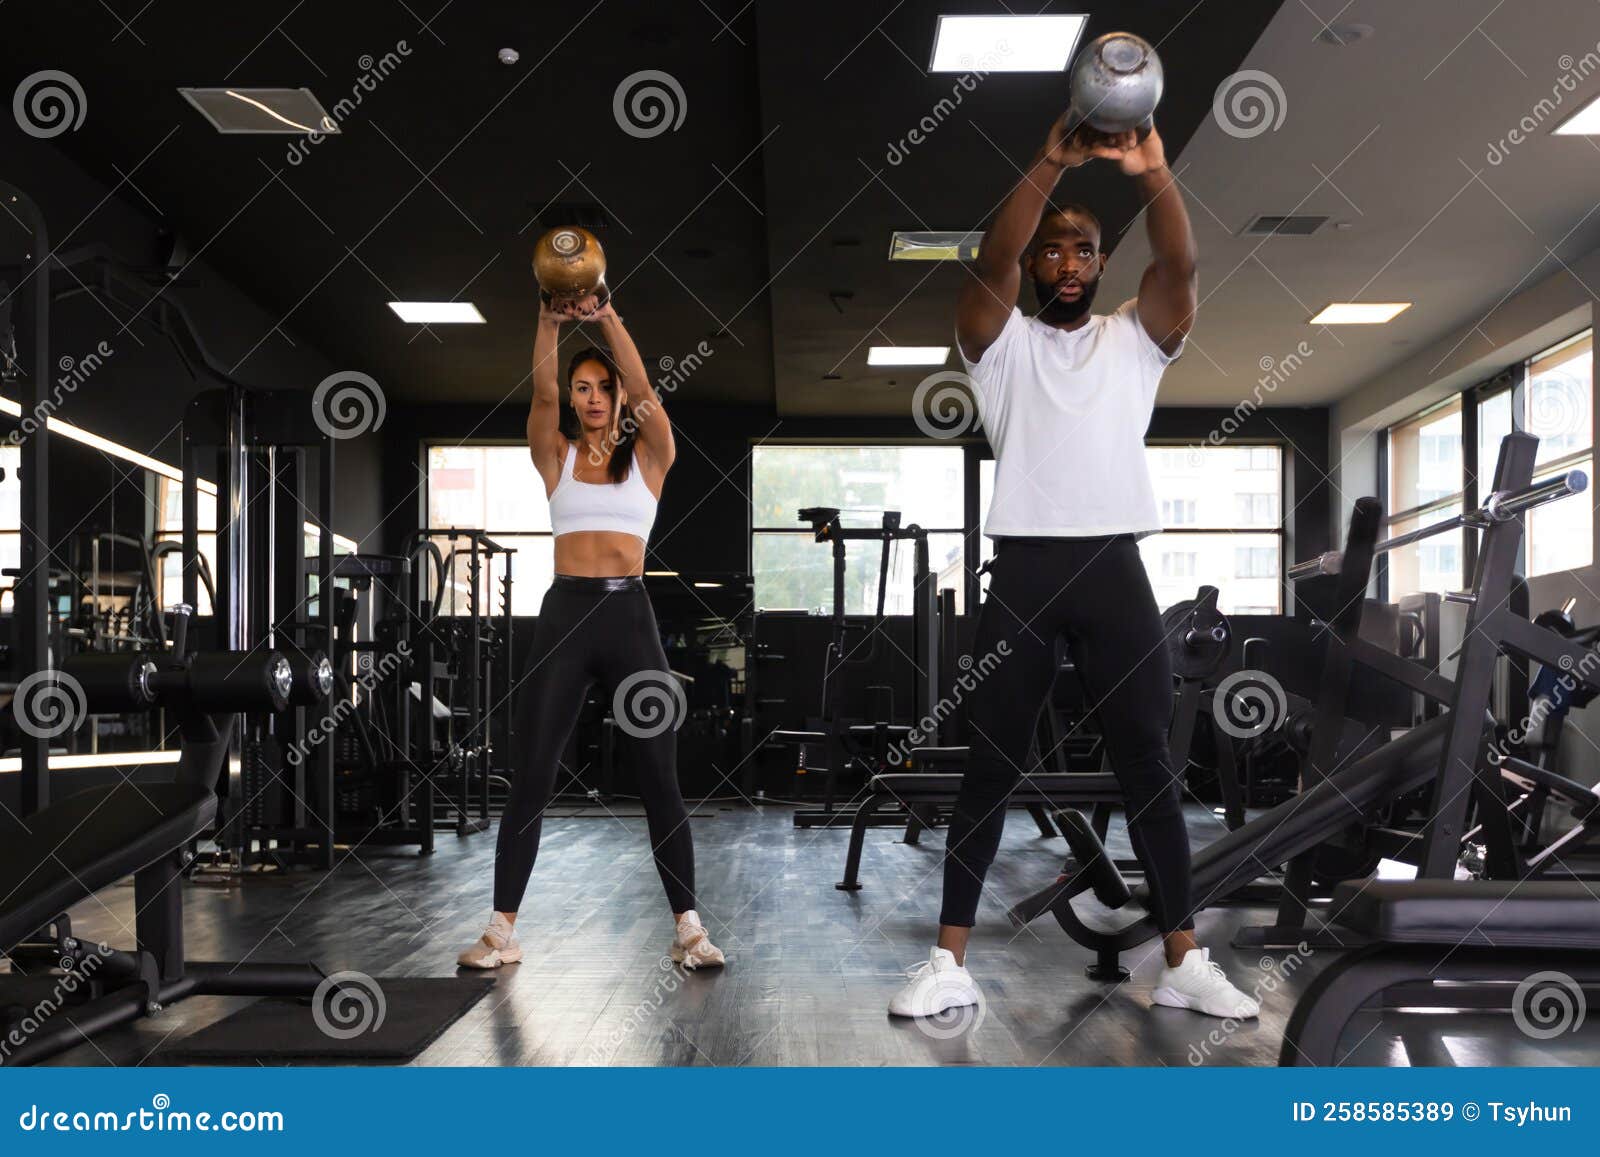 Premium Photo  Group of sportive fit people in a gym taking